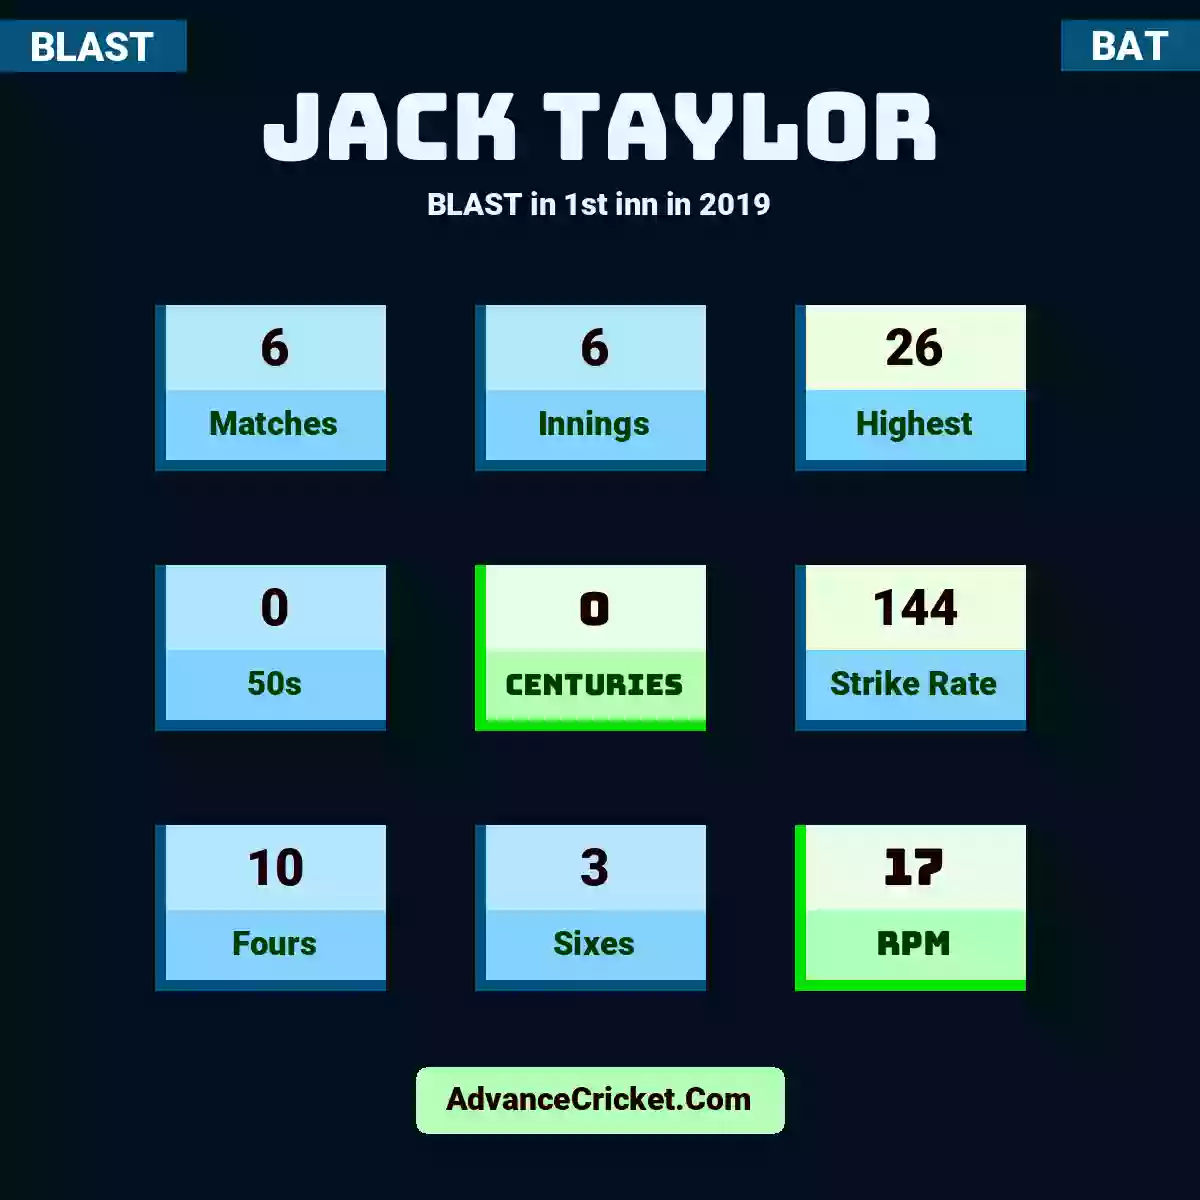 Jack Taylor BLAST  in 1st inn in 2019, Jack Taylor played 6 matches, scored 26 runs as highest, 0 half-centuries, and 0 centuries, with a strike rate of 144. J.Taylor hit 10 fours and 3 sixes, with an RPM of 17.